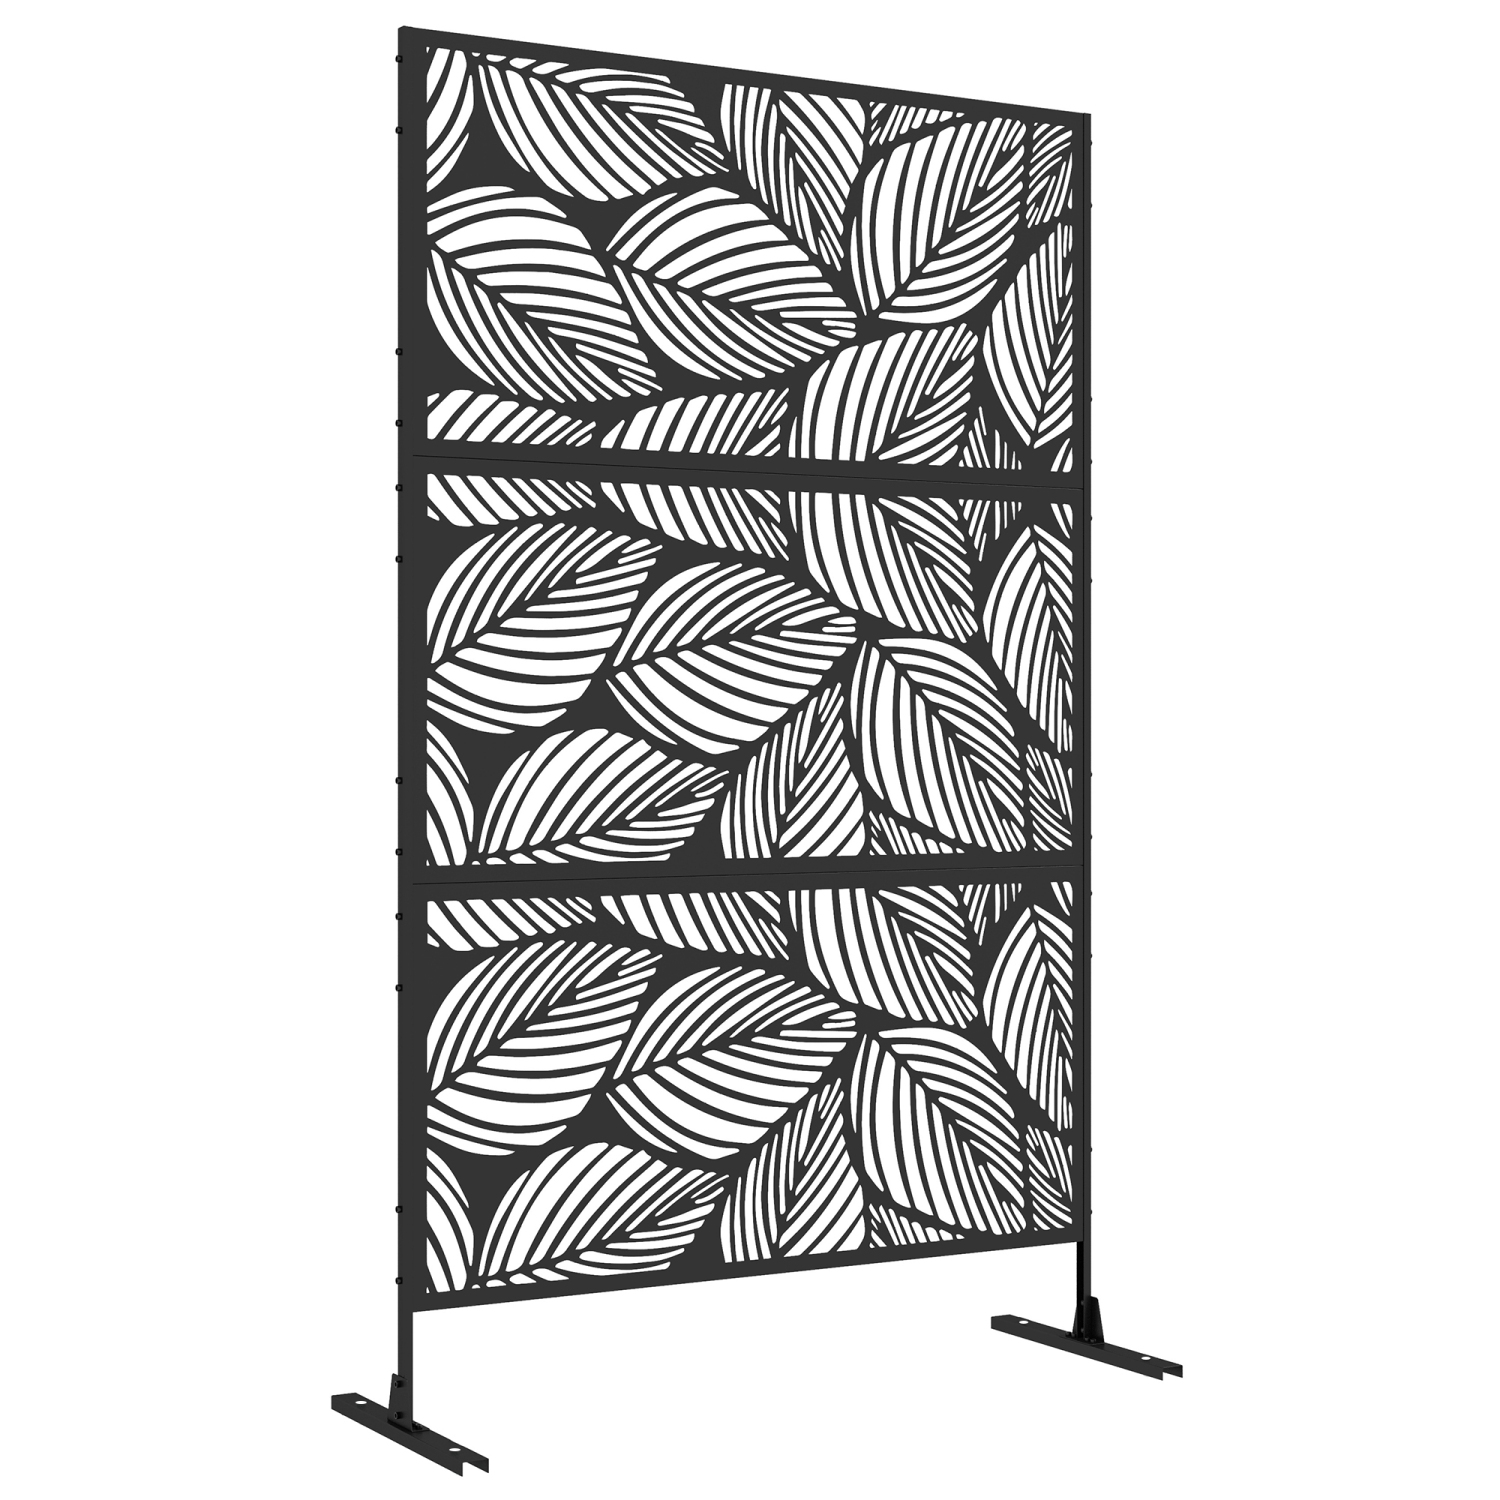 Outsunny Metal Outdoor Privacy Screen, Decorative Outdoor Divider with Stand and Expansion Screws, Freestanding Privacy Panel for Garden, Backyard, Deck, Pool, Hot Tub, Leaf Style